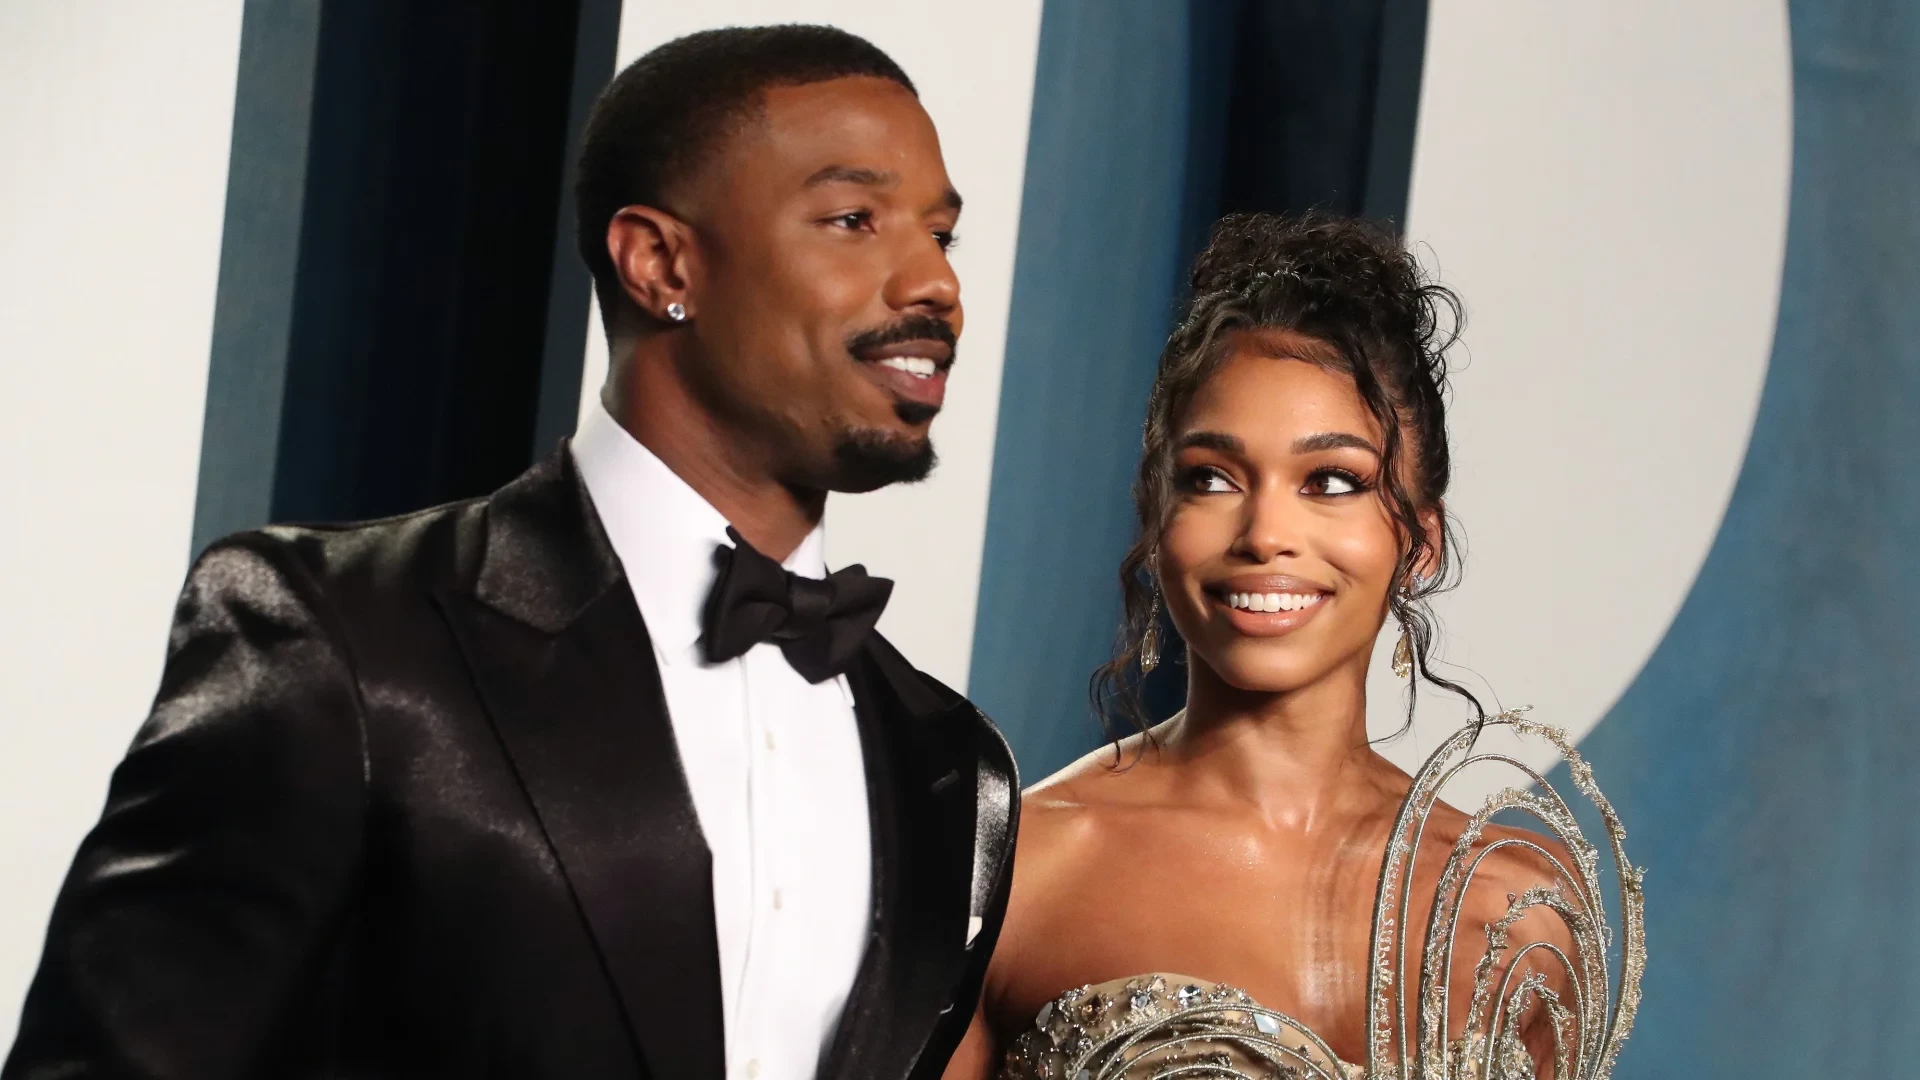 Michael B Jordan and Lori Harvey split after more than a year of dating, with both completely